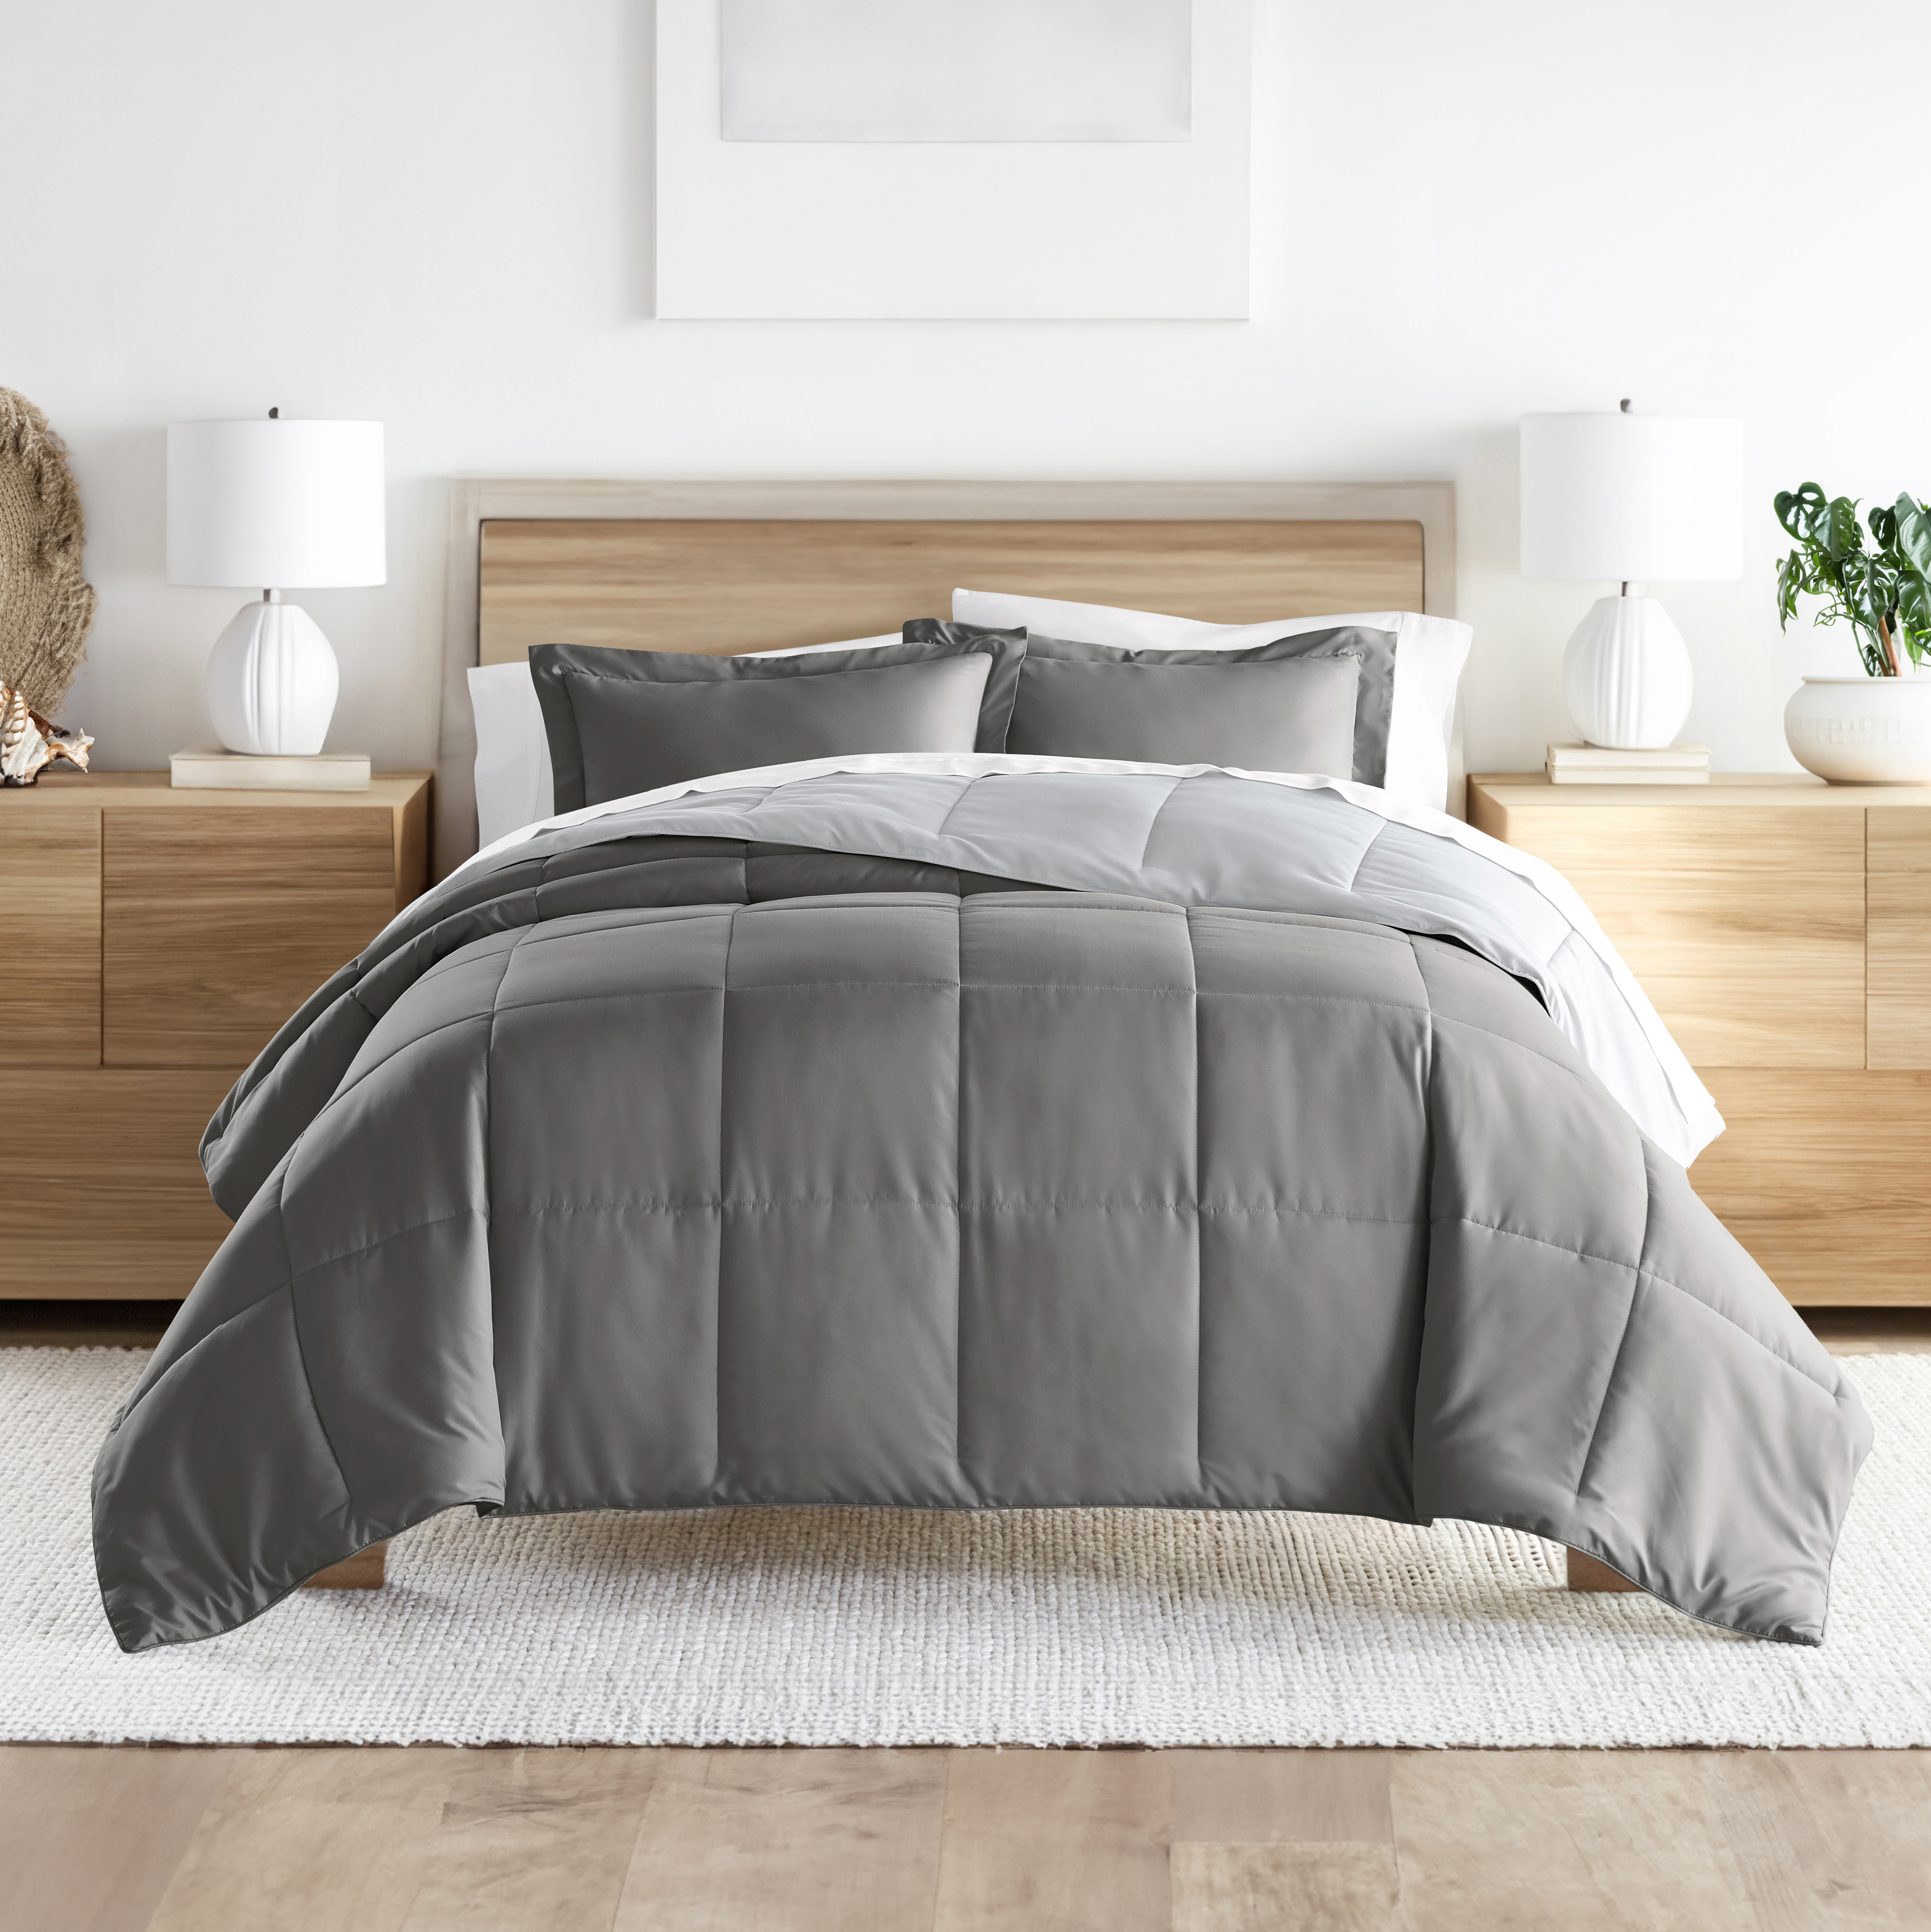 Noble Linens 3-Piece Gray & Silver Reversible Down Alternative Comforter Set, Full/Queen - image 1 of 9